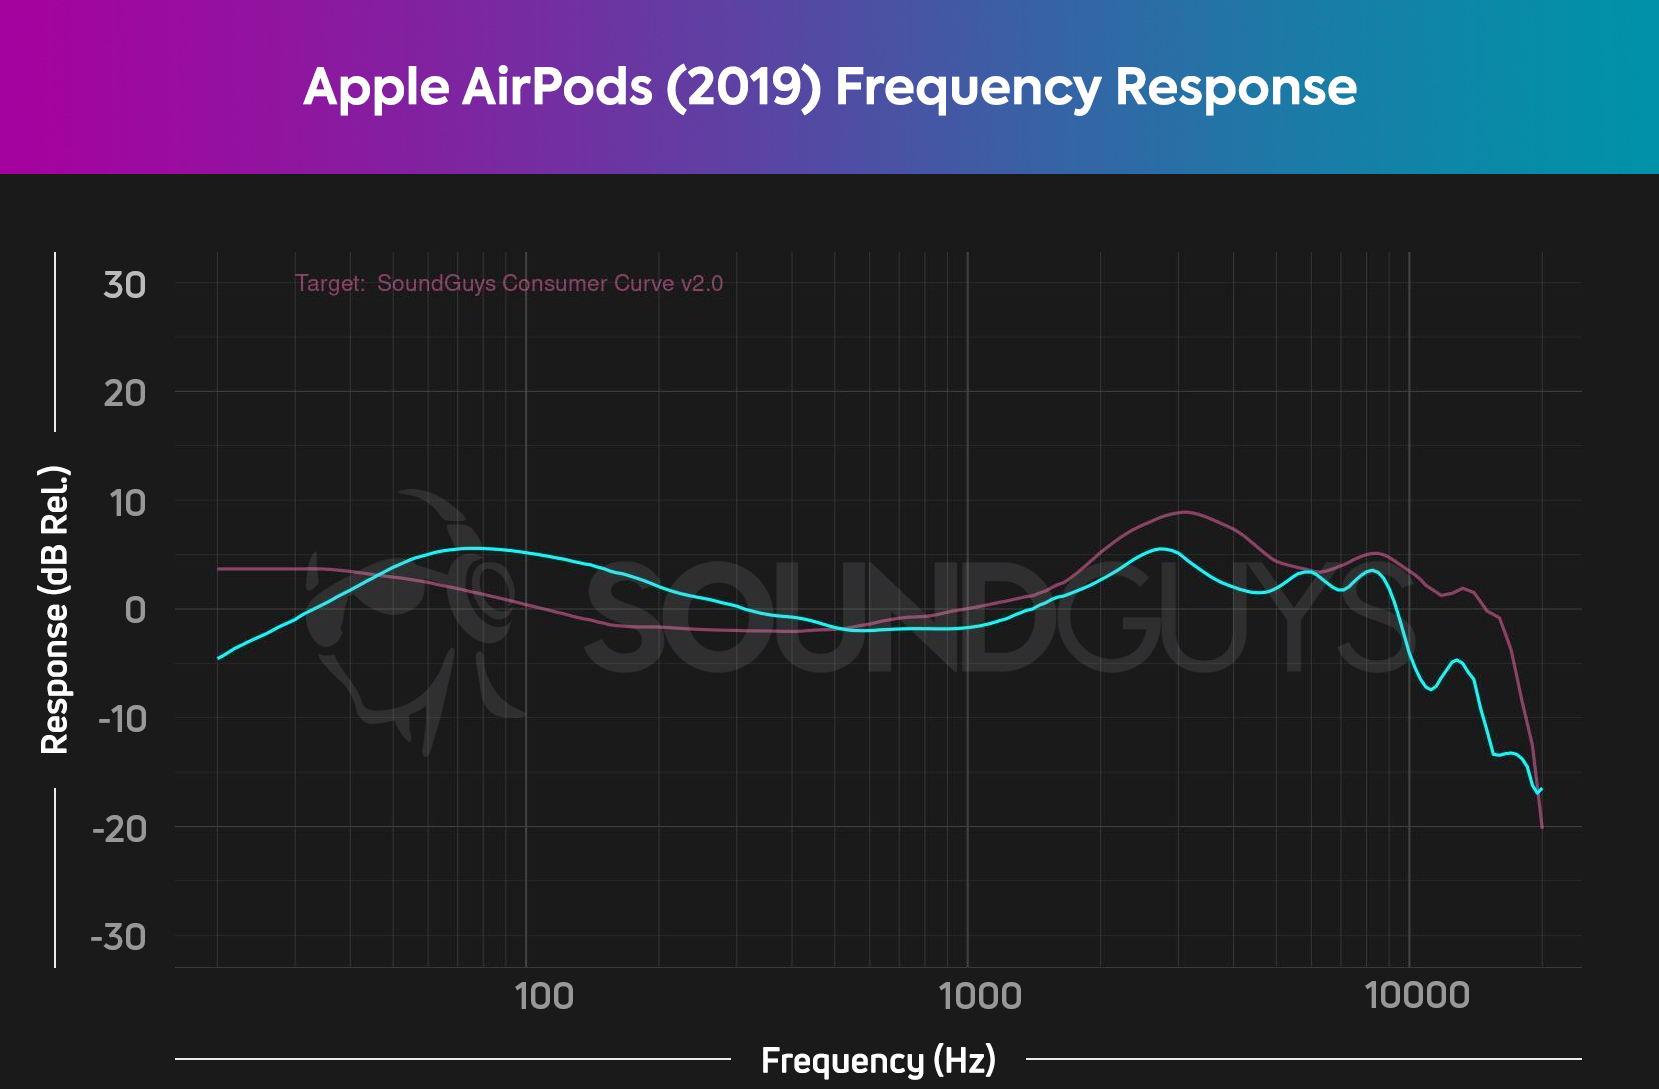 Apple AirPods (2019) frequency response chart showing exaggerated mids and bass with under-emphasized sub bass..